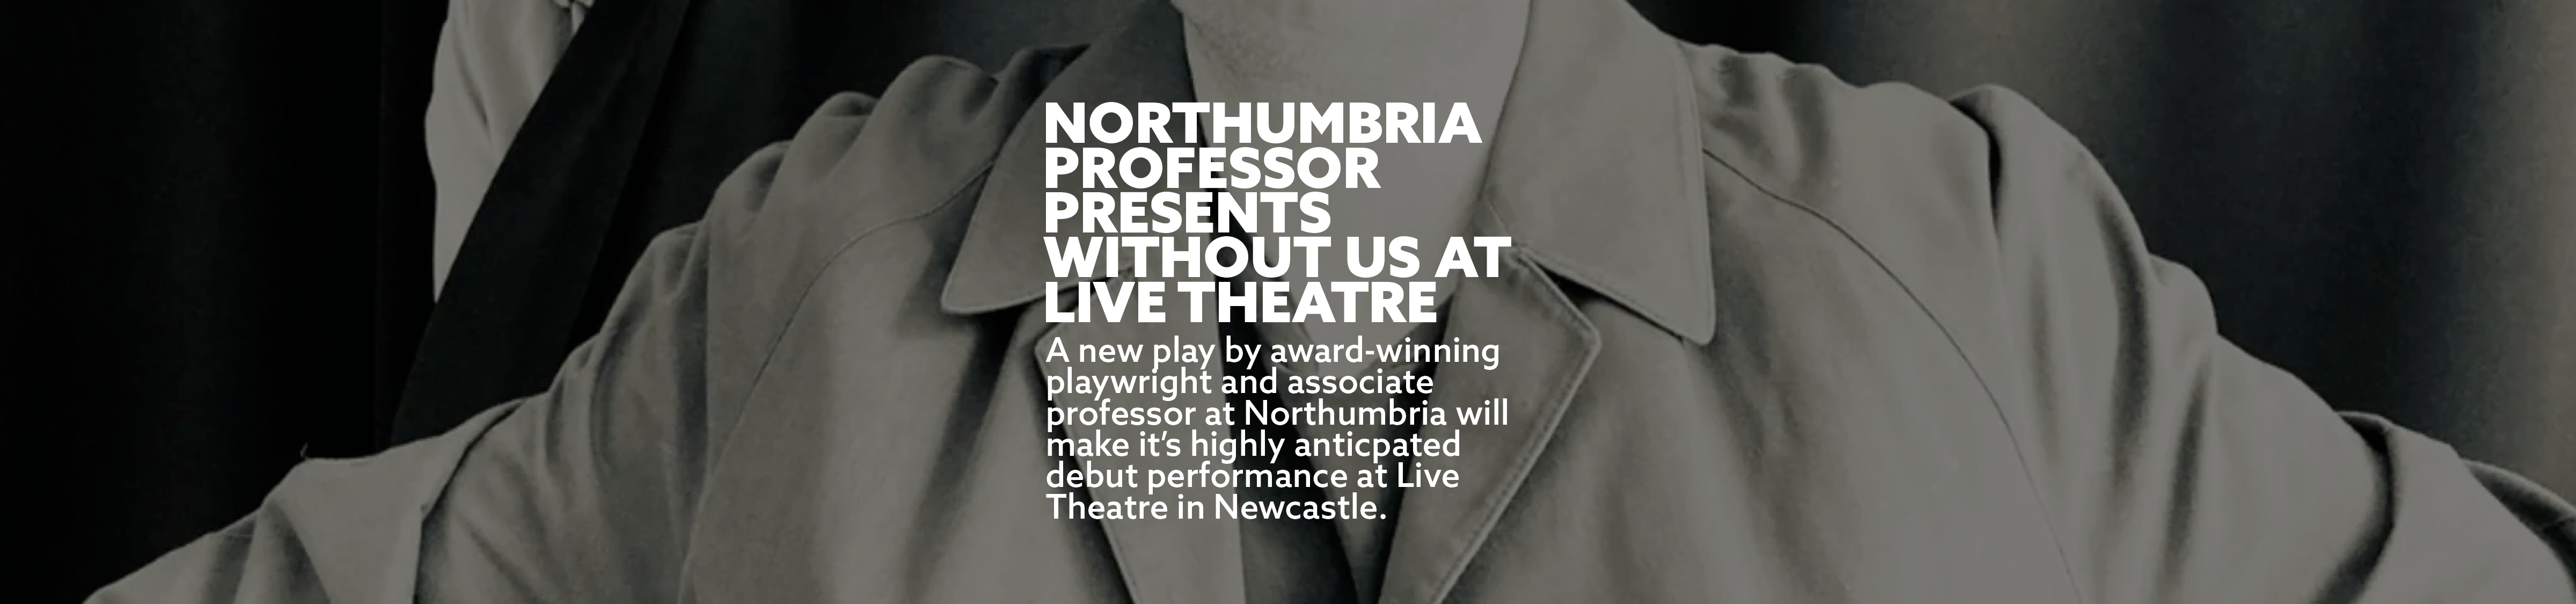 Northumbria professor presents without us at live theatre